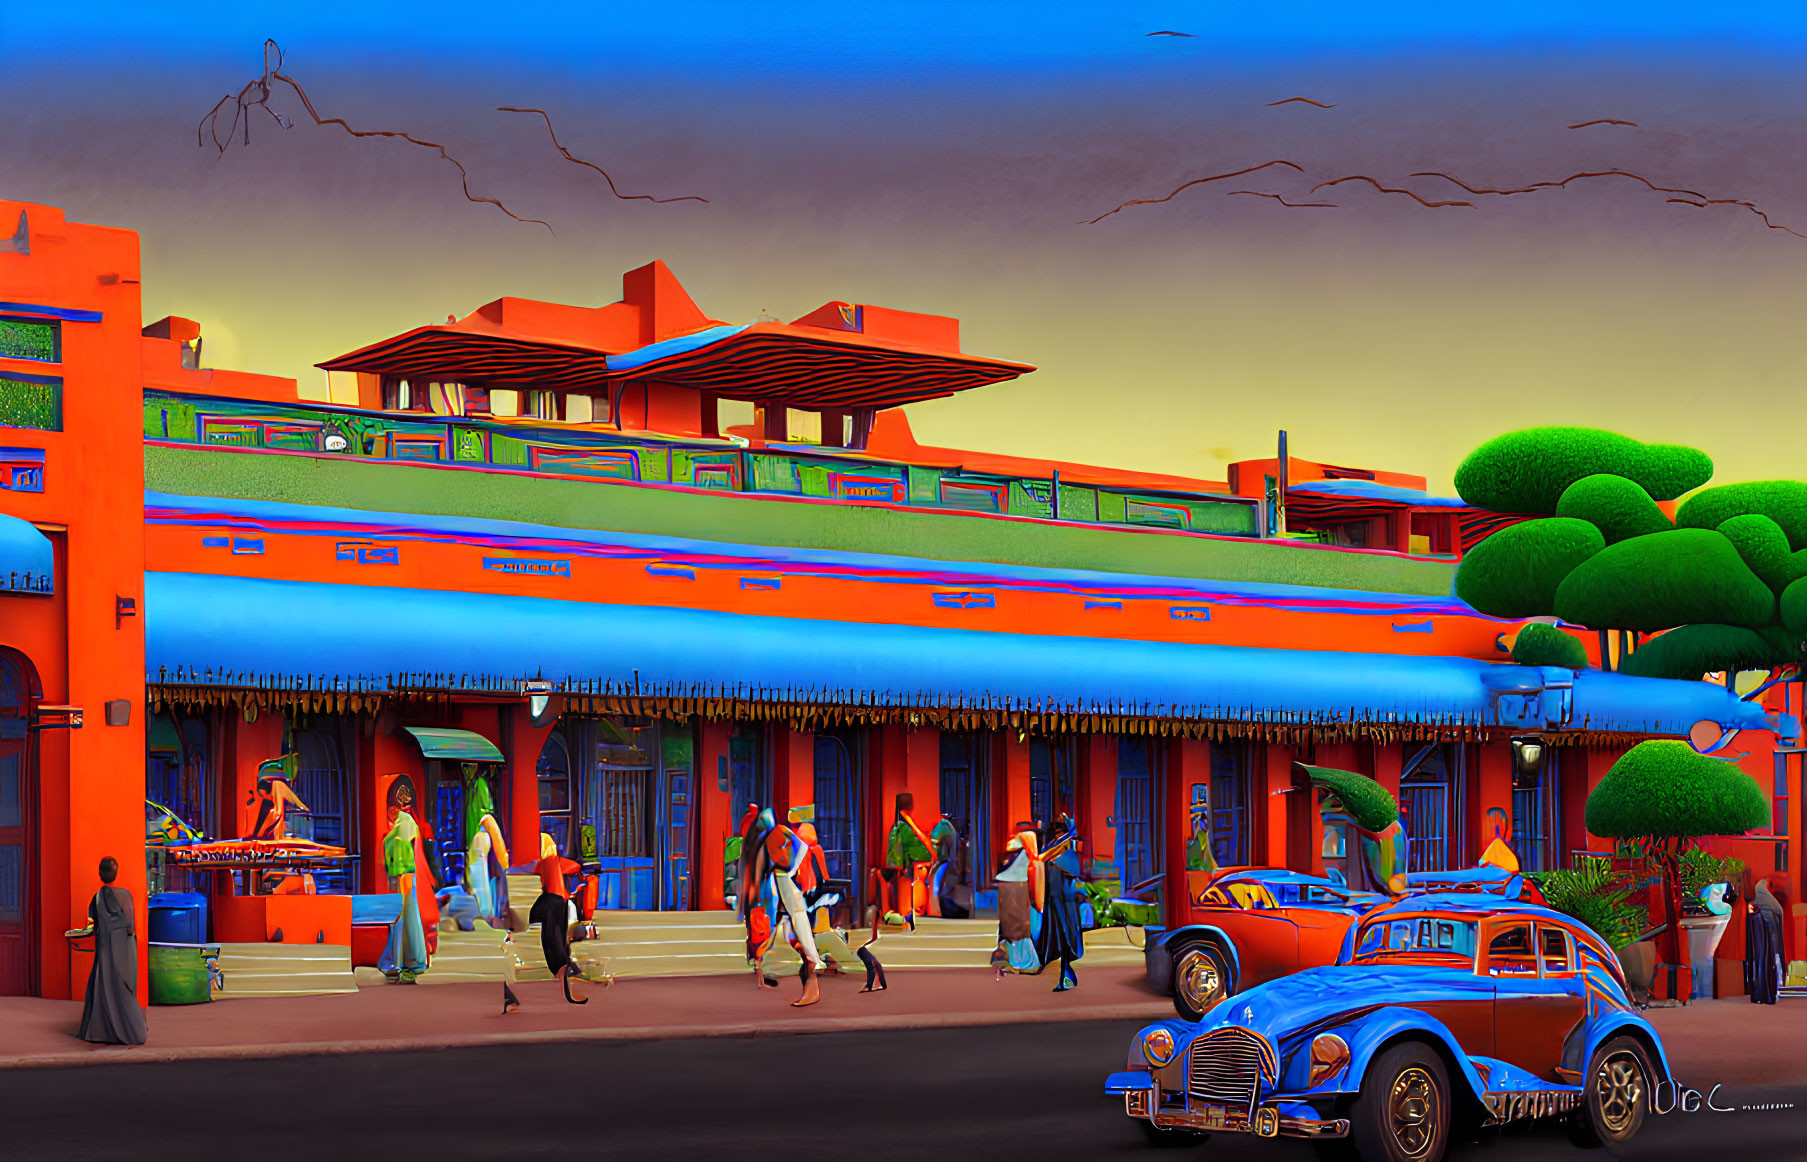 Colorful street scene with people, classic car, and Southwestern buildings at twilight